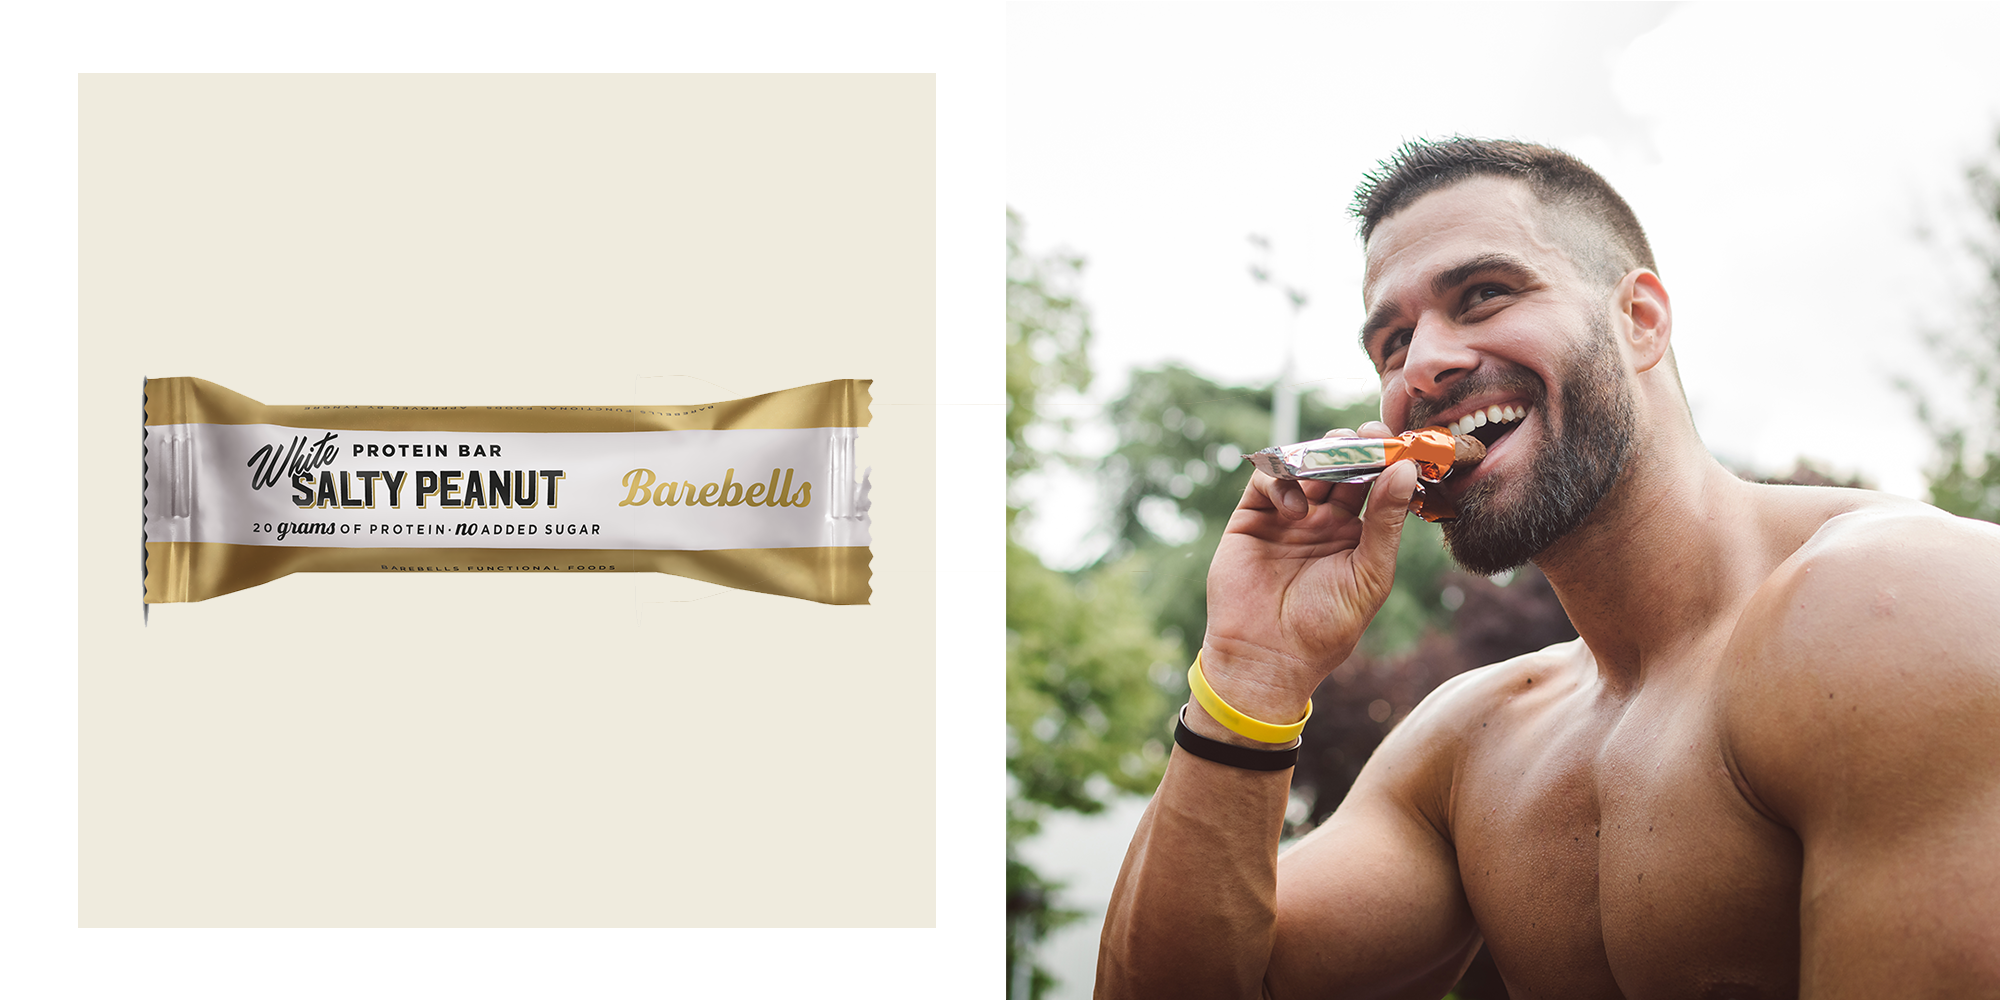 Barebells – Tastier and healthier protein snacks and meals